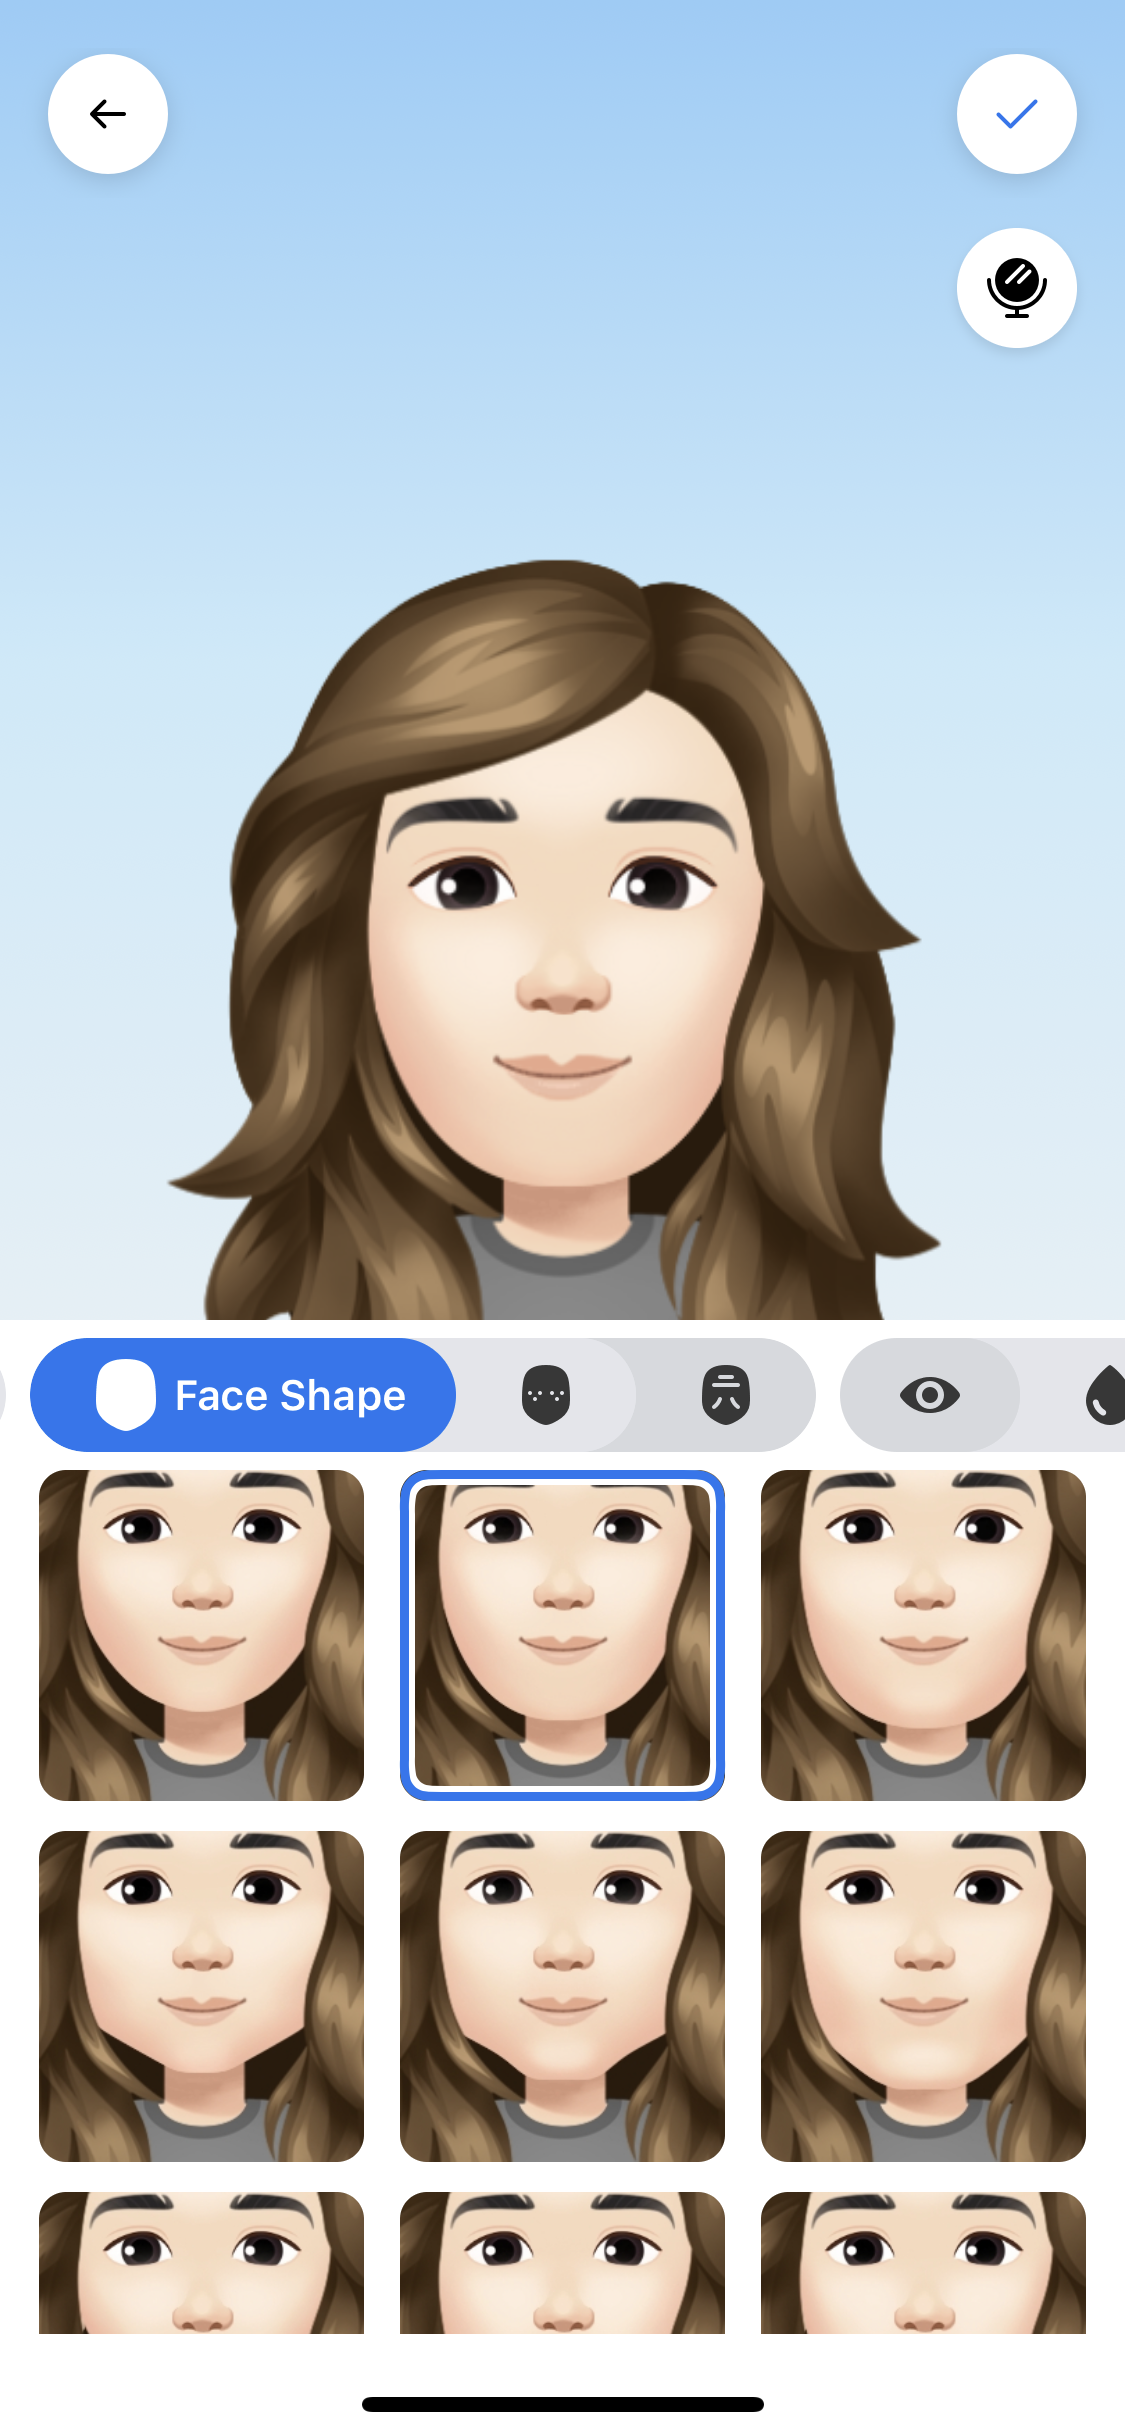 How to Make a Facebook Avatar on iPhone Step By Step Guide  iGeeksBlog